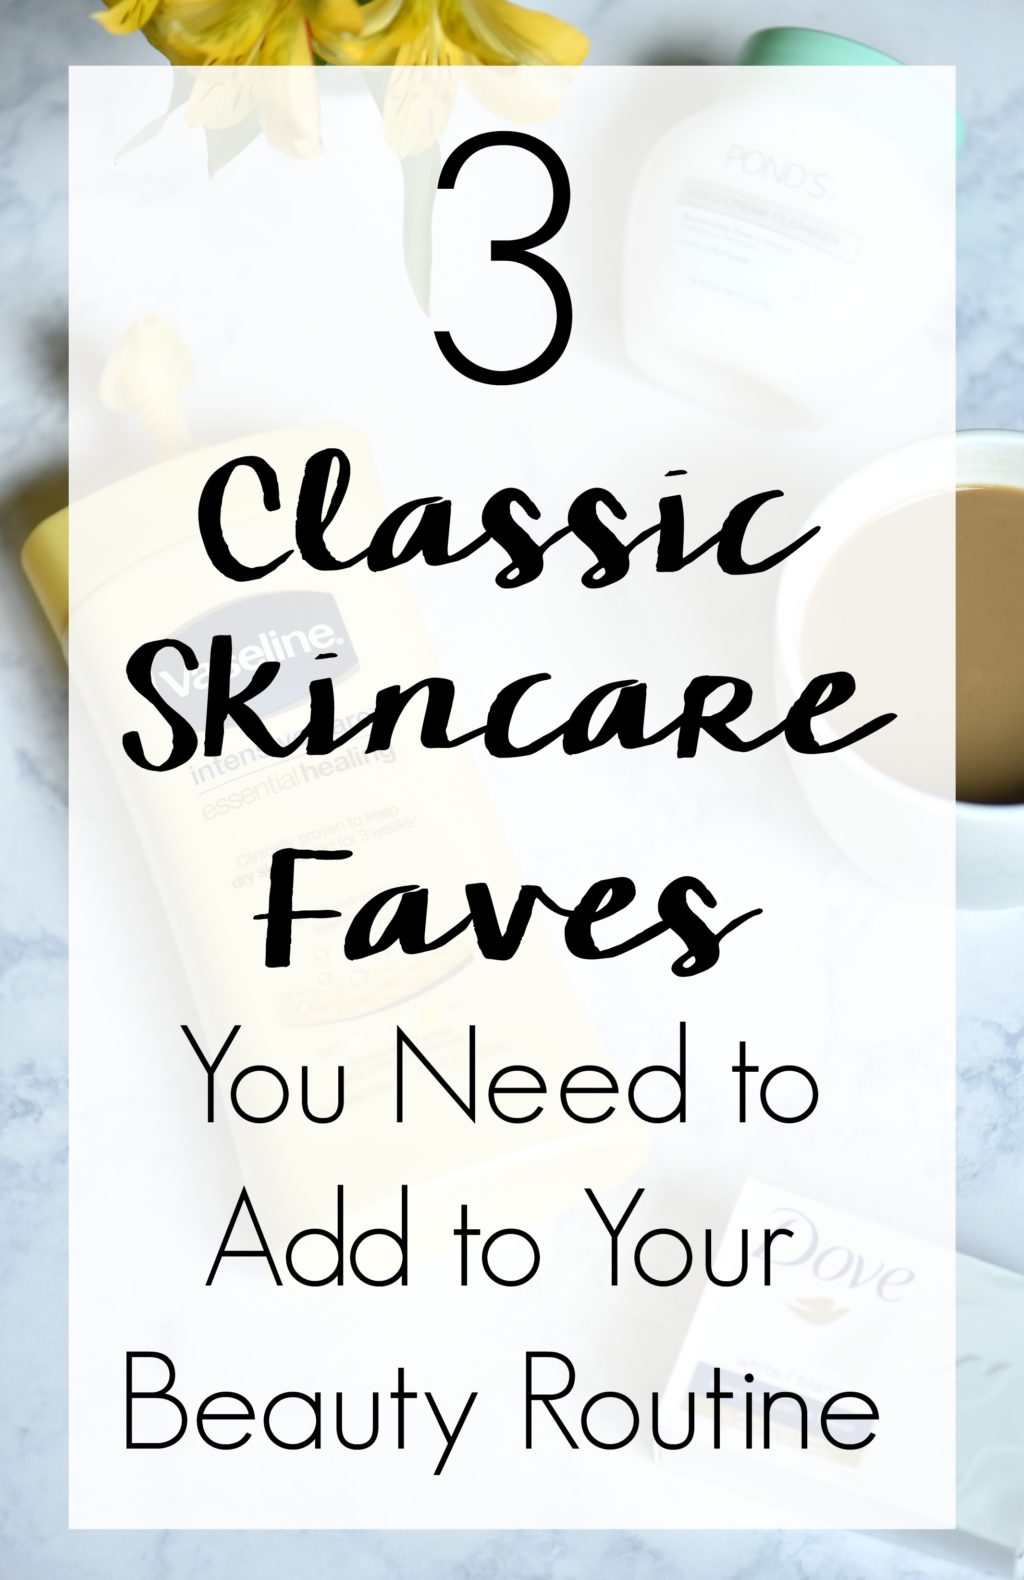 They say everything comes back around again from fashion to beauty. Here are 3 classic skincare faves that you need to add to your beauty routine!